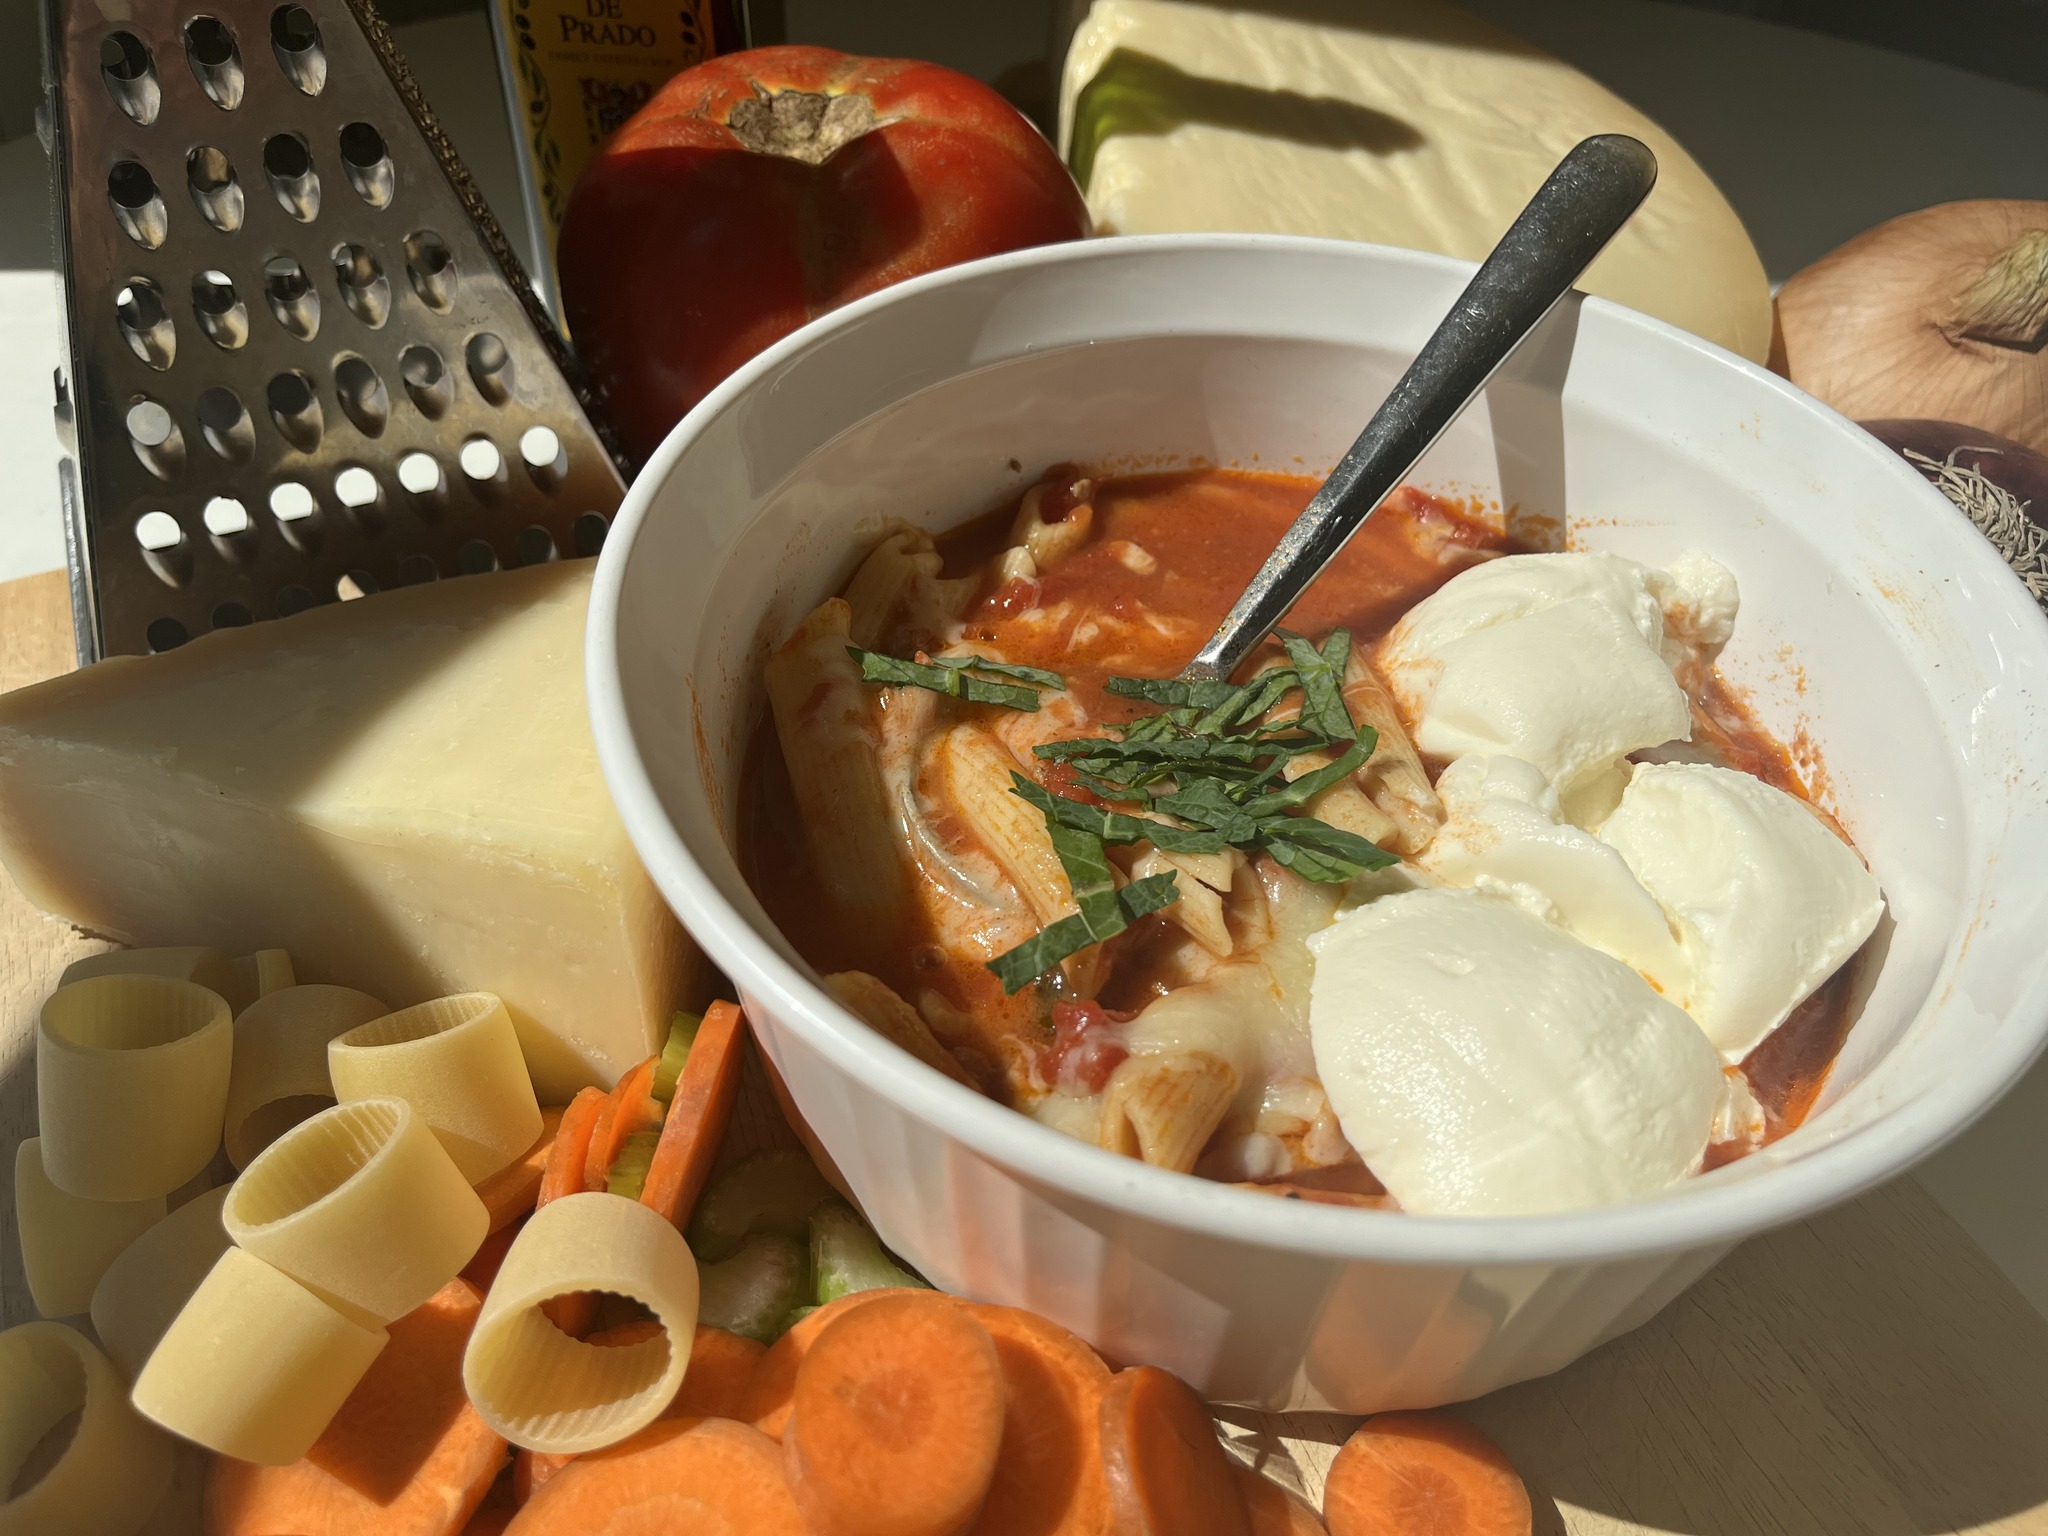 Enjoy a bowl of tomato soup topped with melty mozzarella cheese, beautifully contrasted by vibrant ingredients such as fresh cheese, crunchy carrots, delicious pasta and a traditional grater, all showcased under the glow of natural lighting.